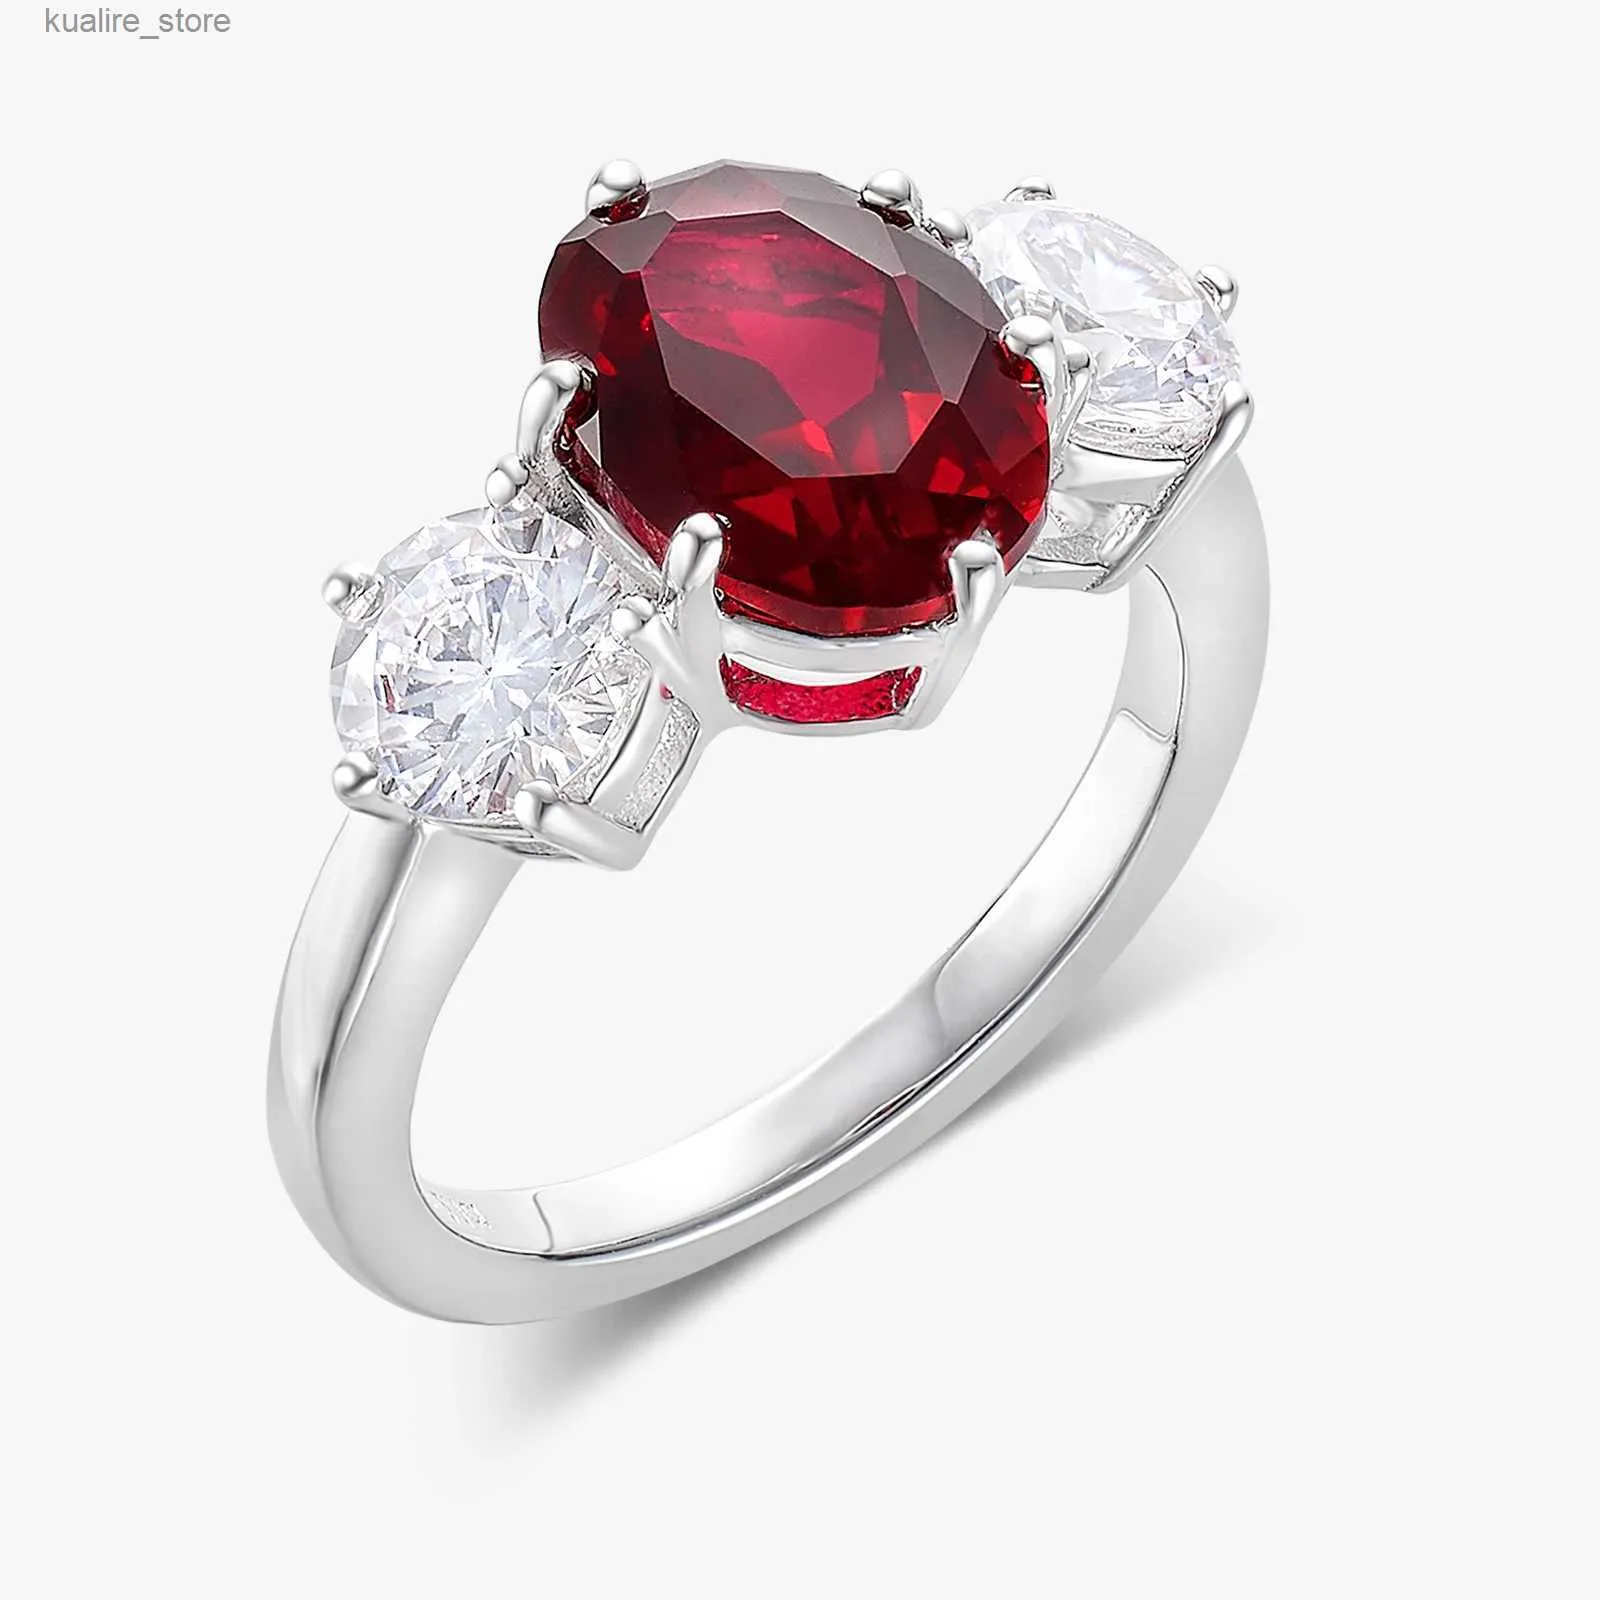 Cluster Rings CUMEE Classic Little Crate Three Stone Culture Ruby Ring 925 Silver Gold Plated Gift for Wife and Girlfriend L240402